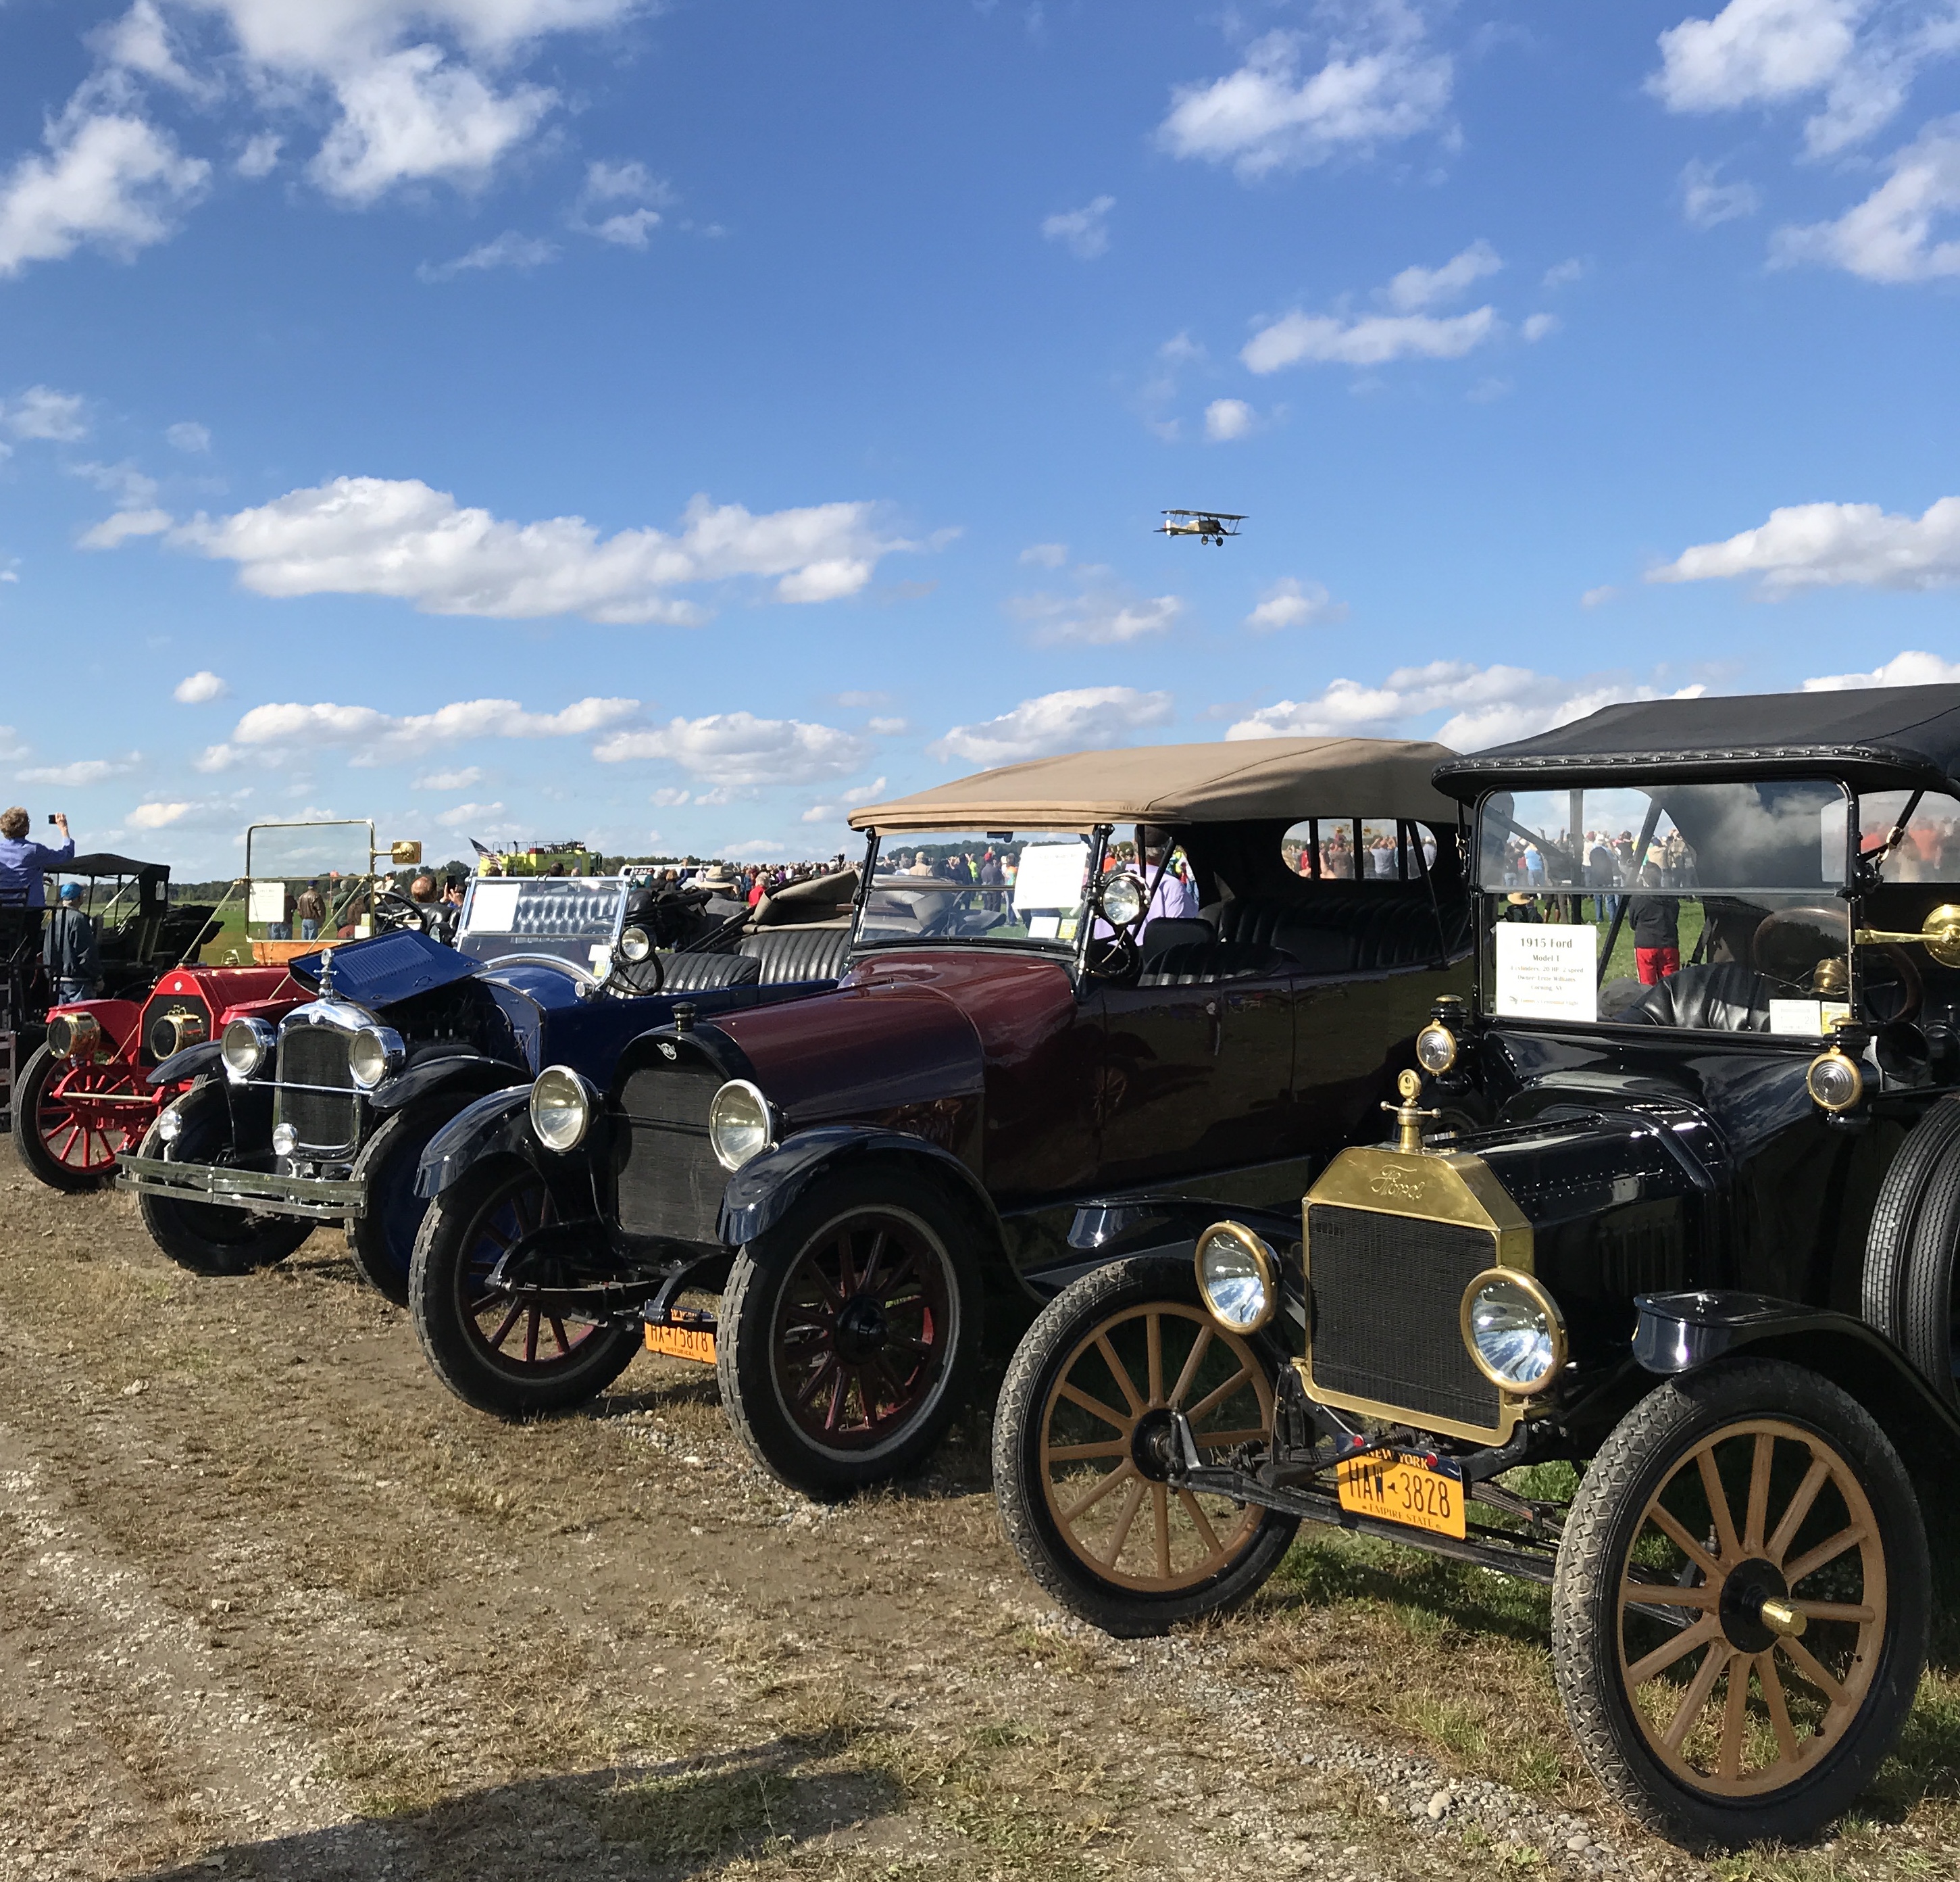 A image of several vintage cars in a line.